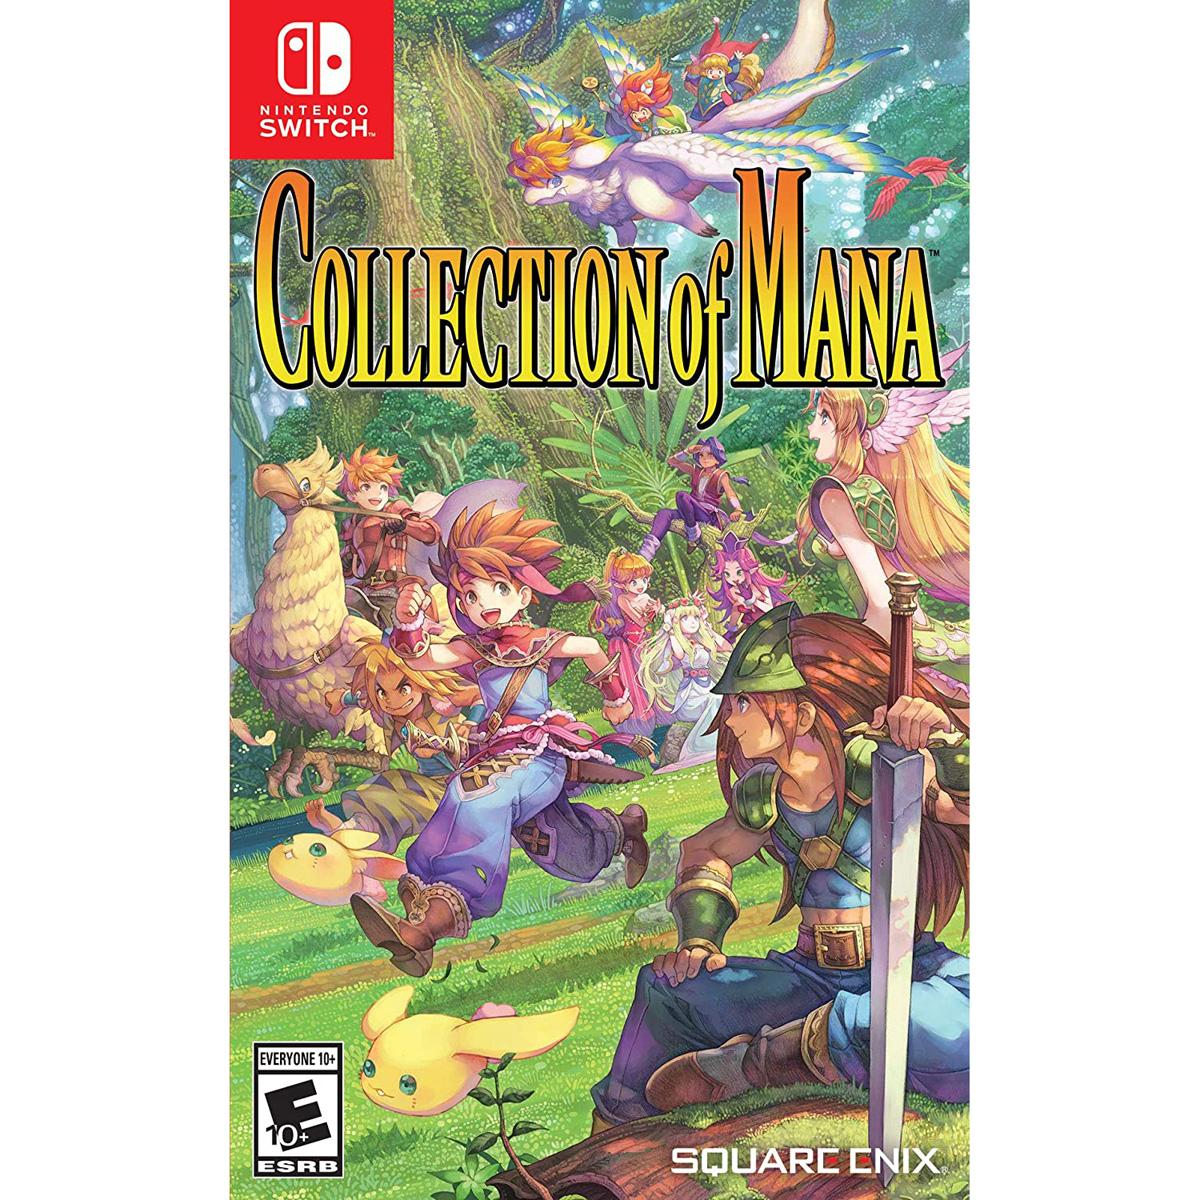 Collection of Mana Nintendo Switch for $19.99